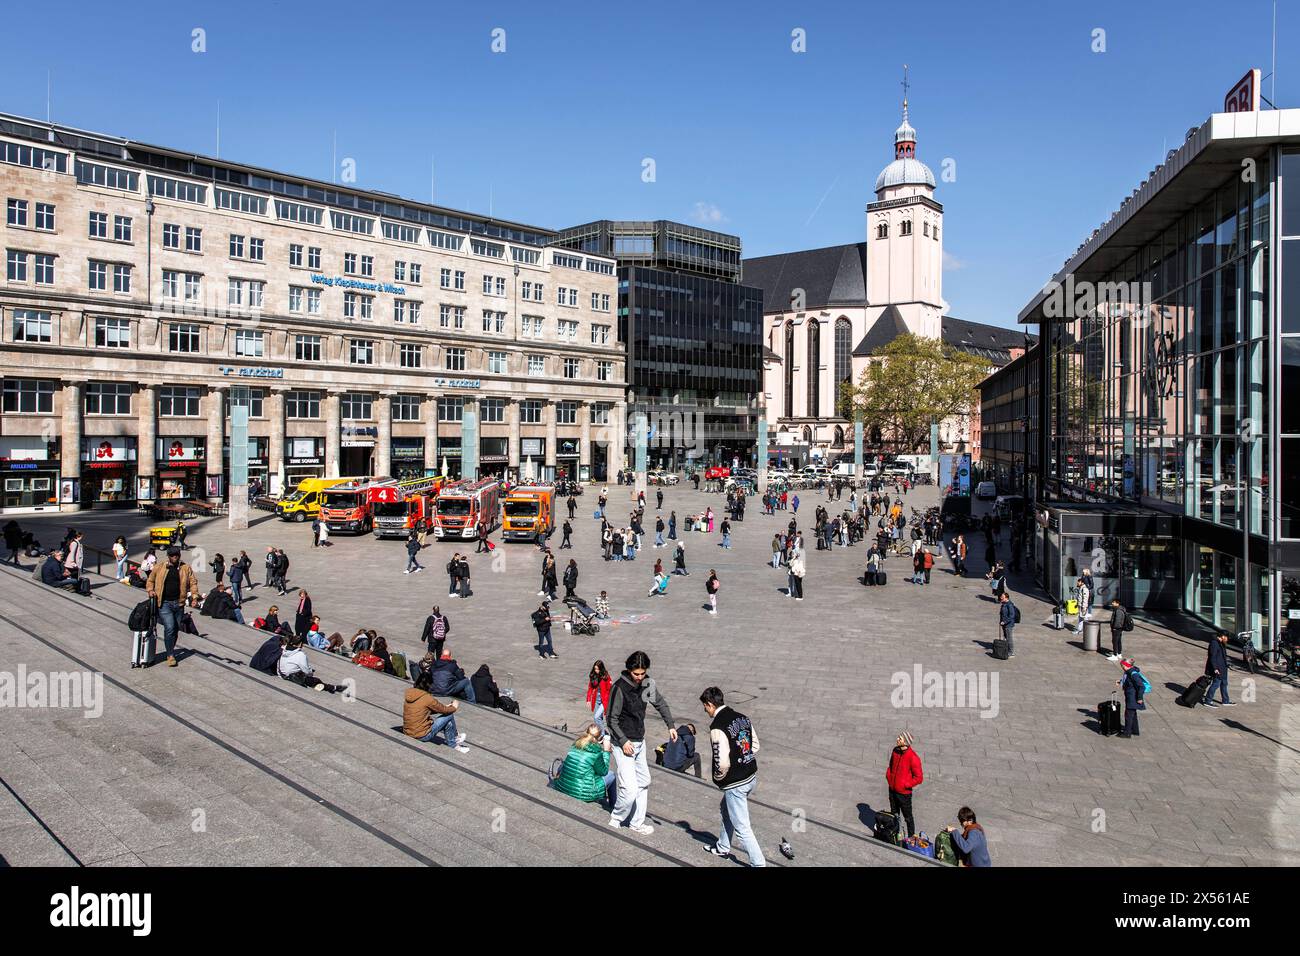 people in front of the central station, church St. Mariae Himmelfahrt, Cologne, Germany. Menschen vor dem Hauptbahnhof, Kirche St. Mariae Himmelfahrt, Stock Photo